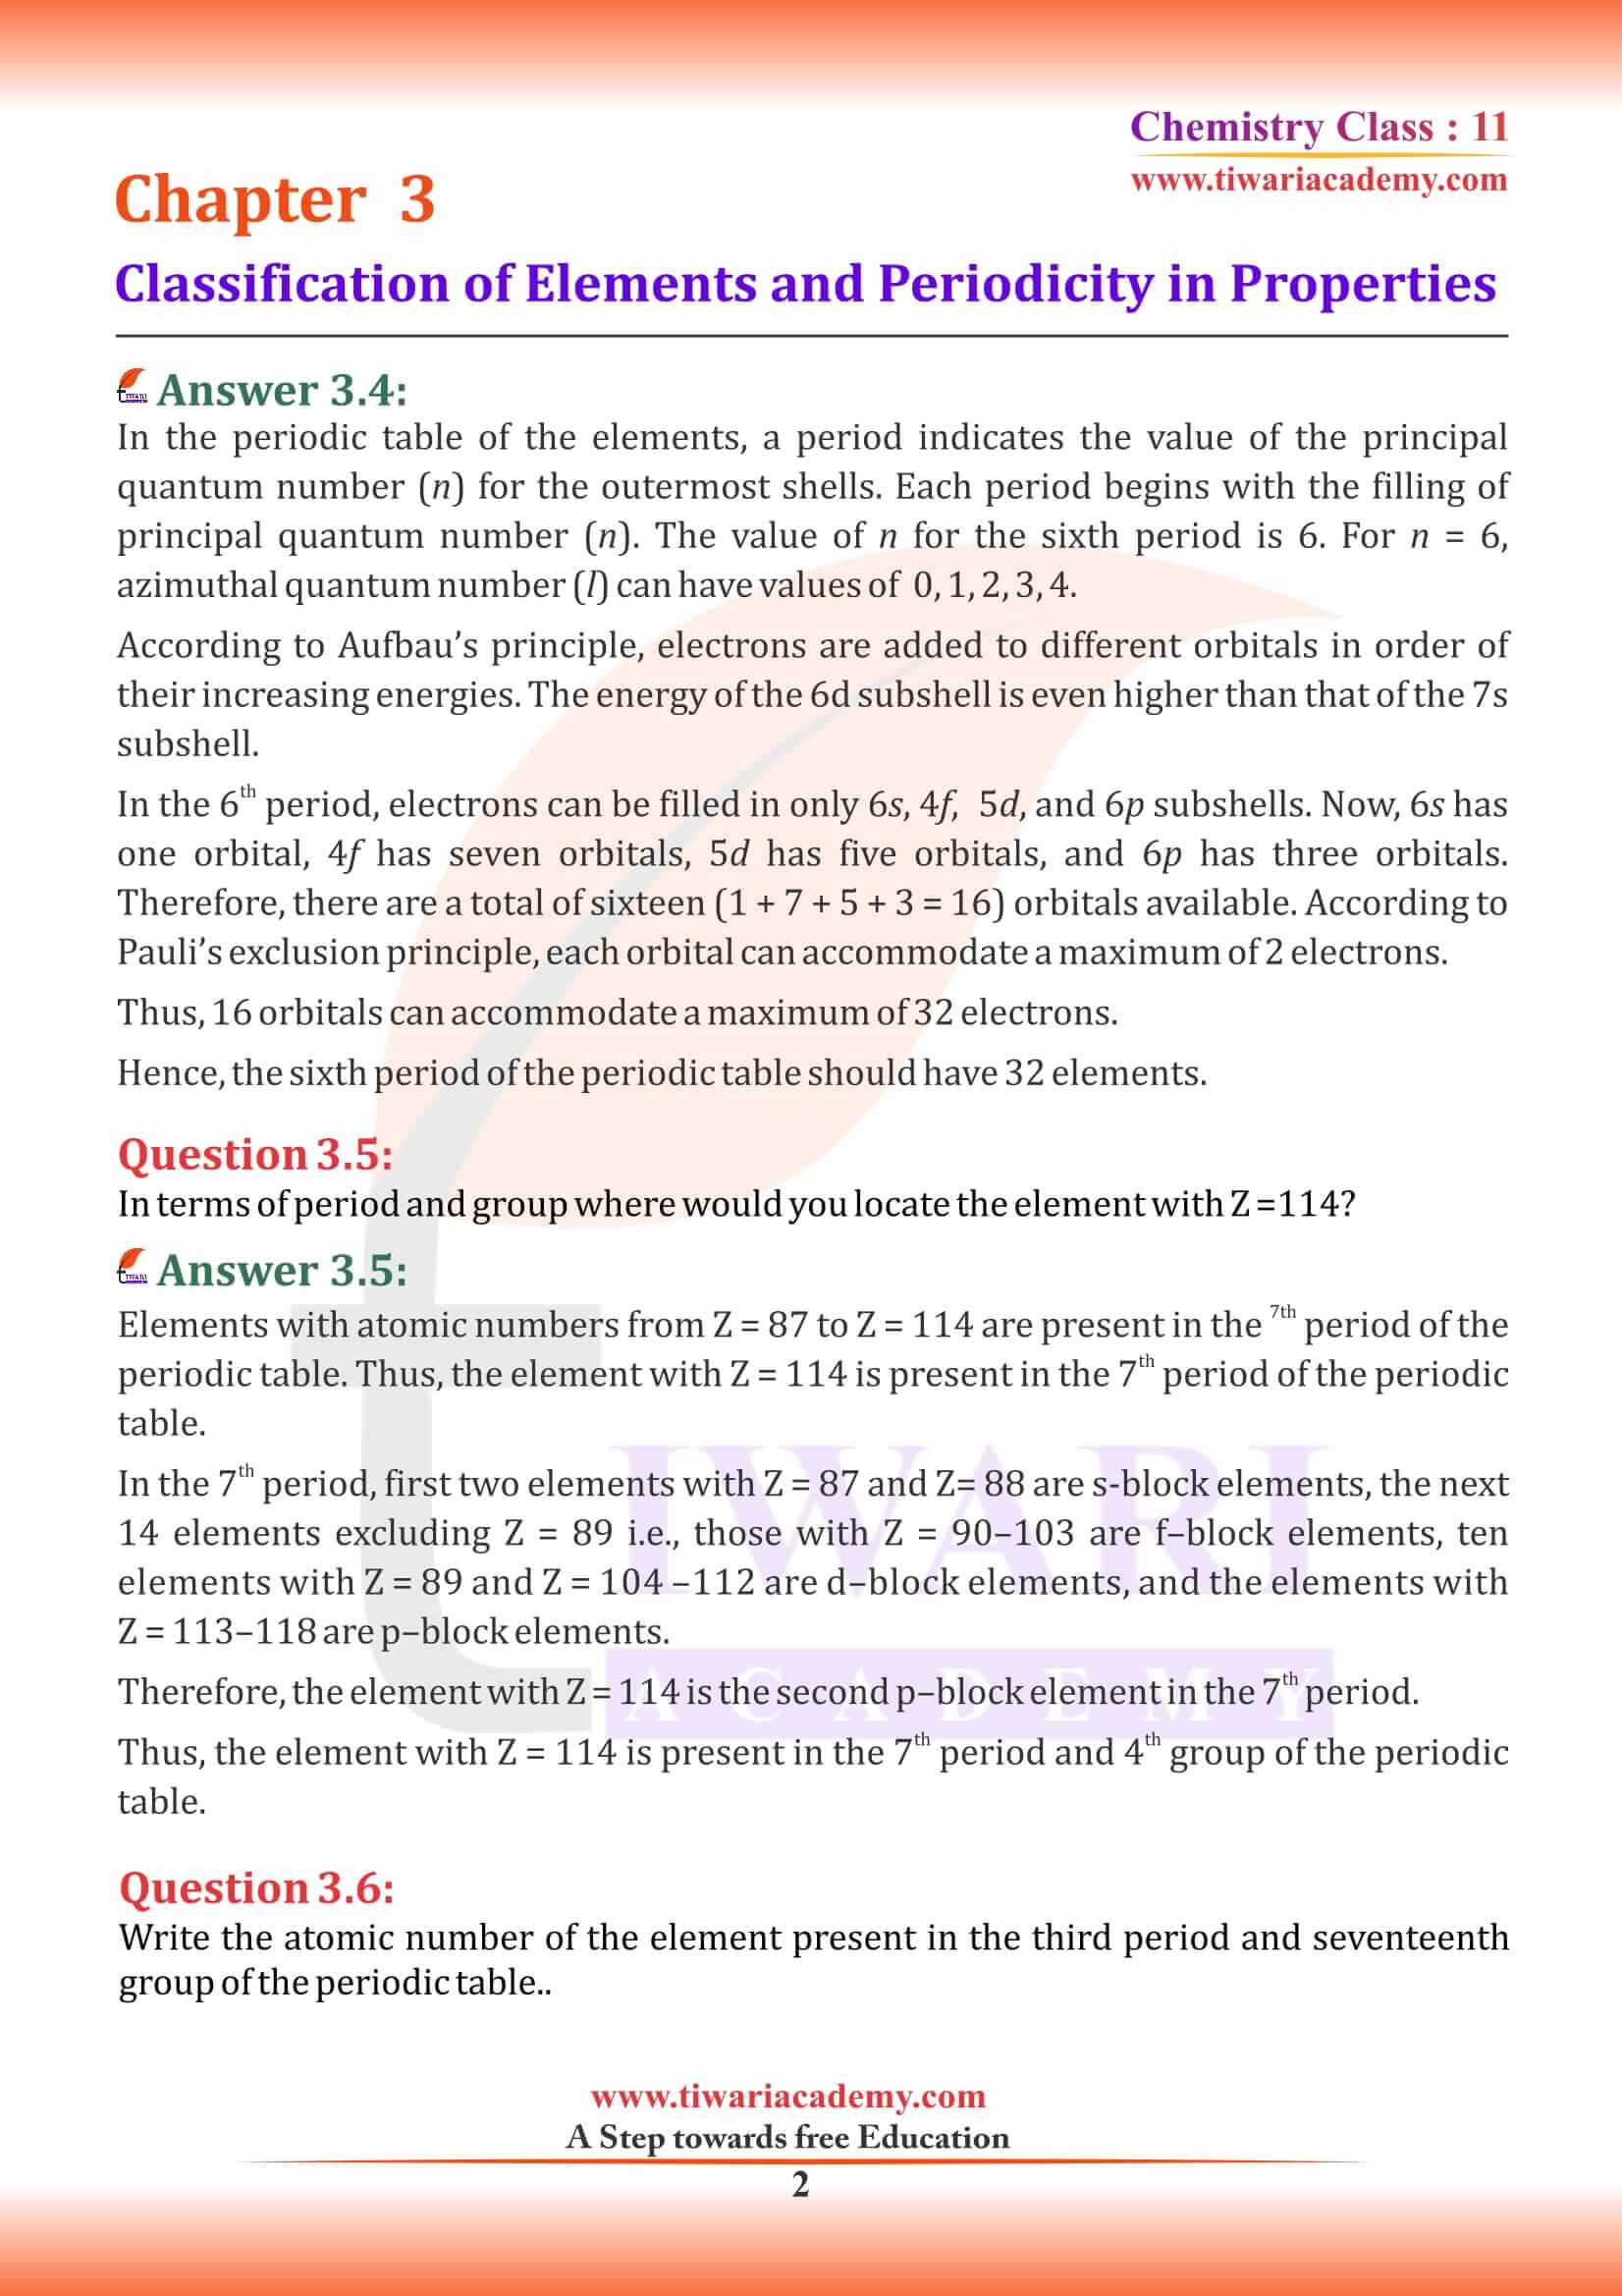 NCERT Solutions for Class 11 Chemistry Chapter 3